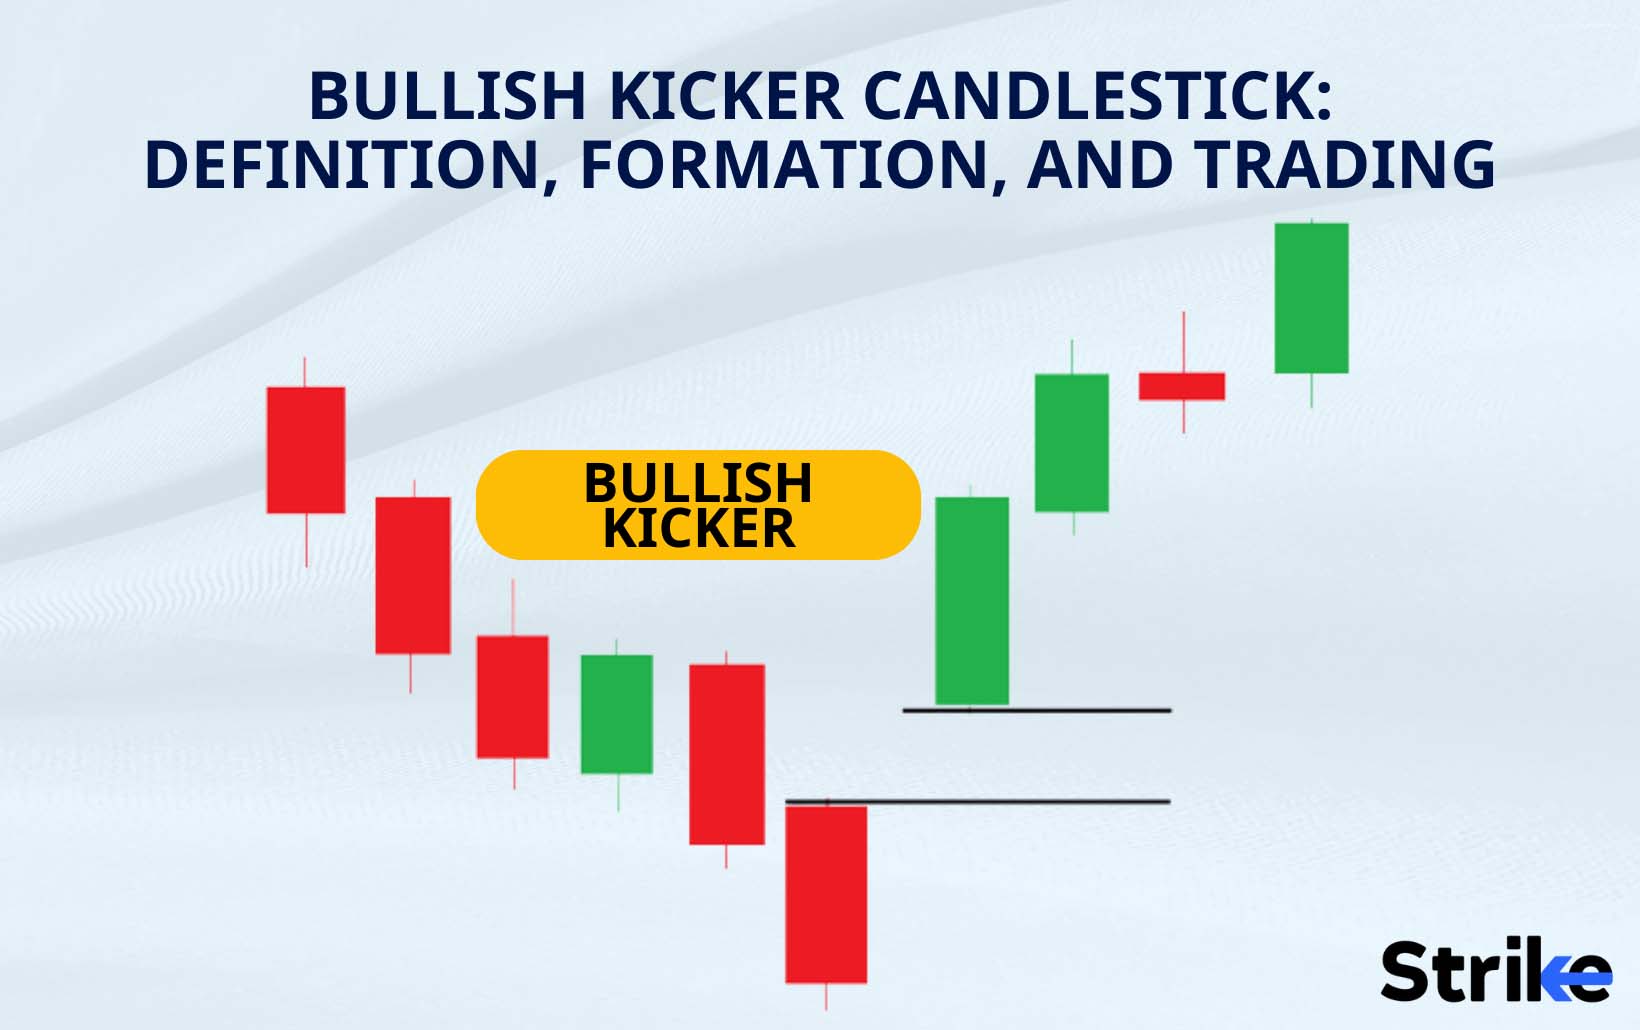 Bullish Kicker Candlestick: Definition, Formation, and Trading